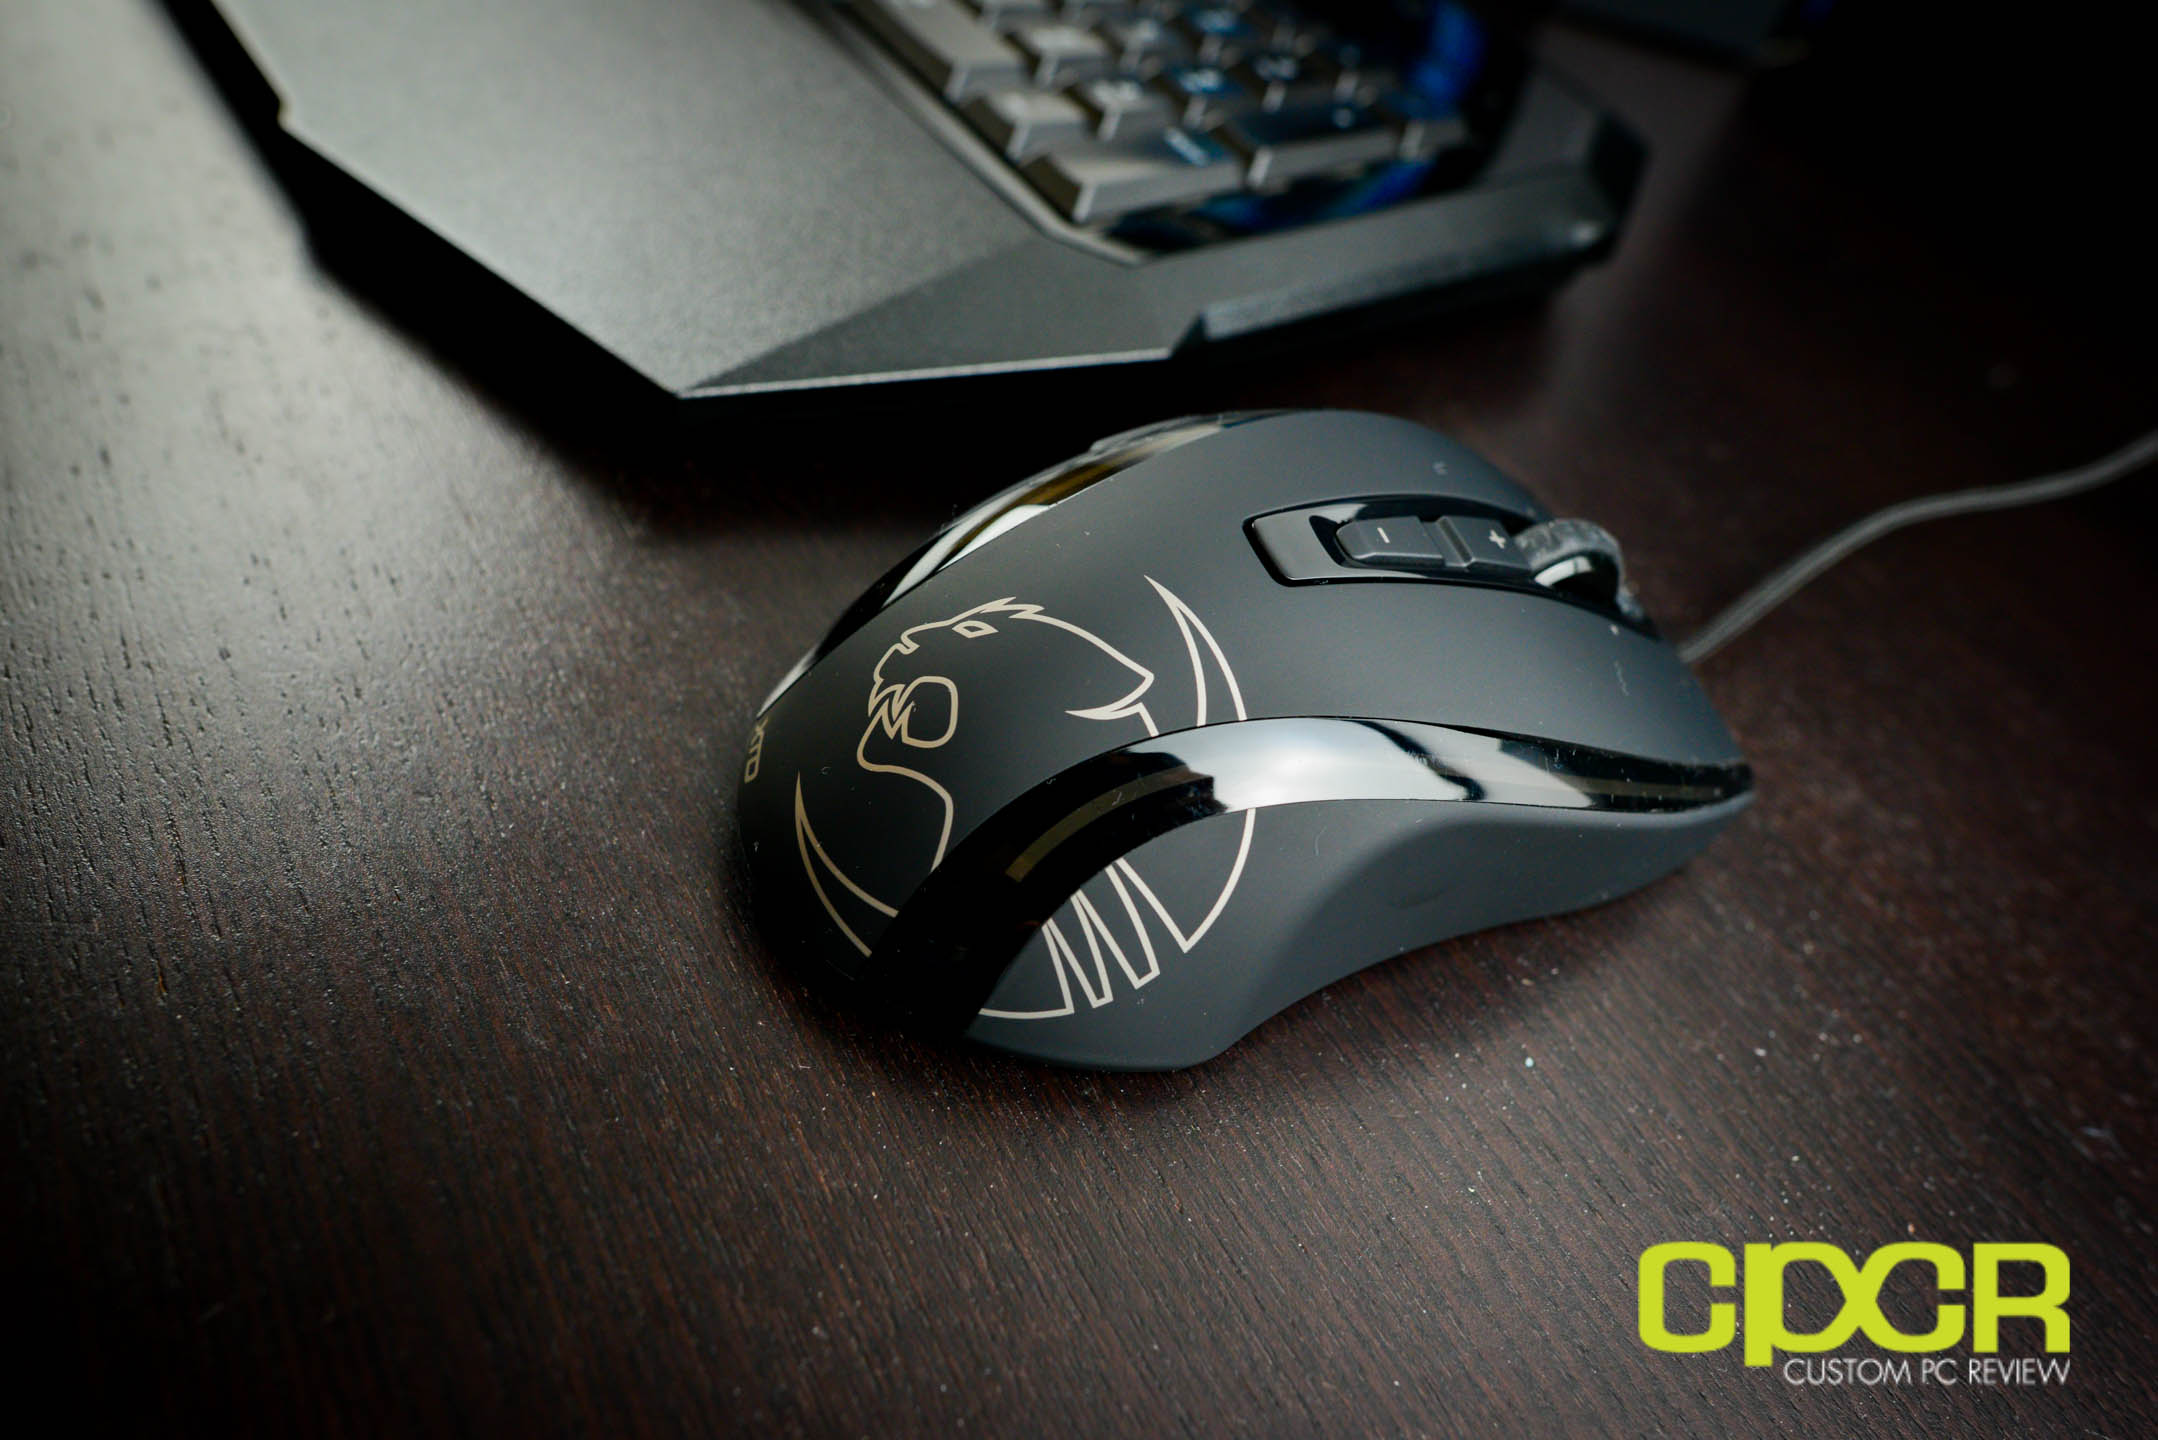 Review: ROCCAT Kone XTD and ROCCAT Isku FX Gaming Peripherals